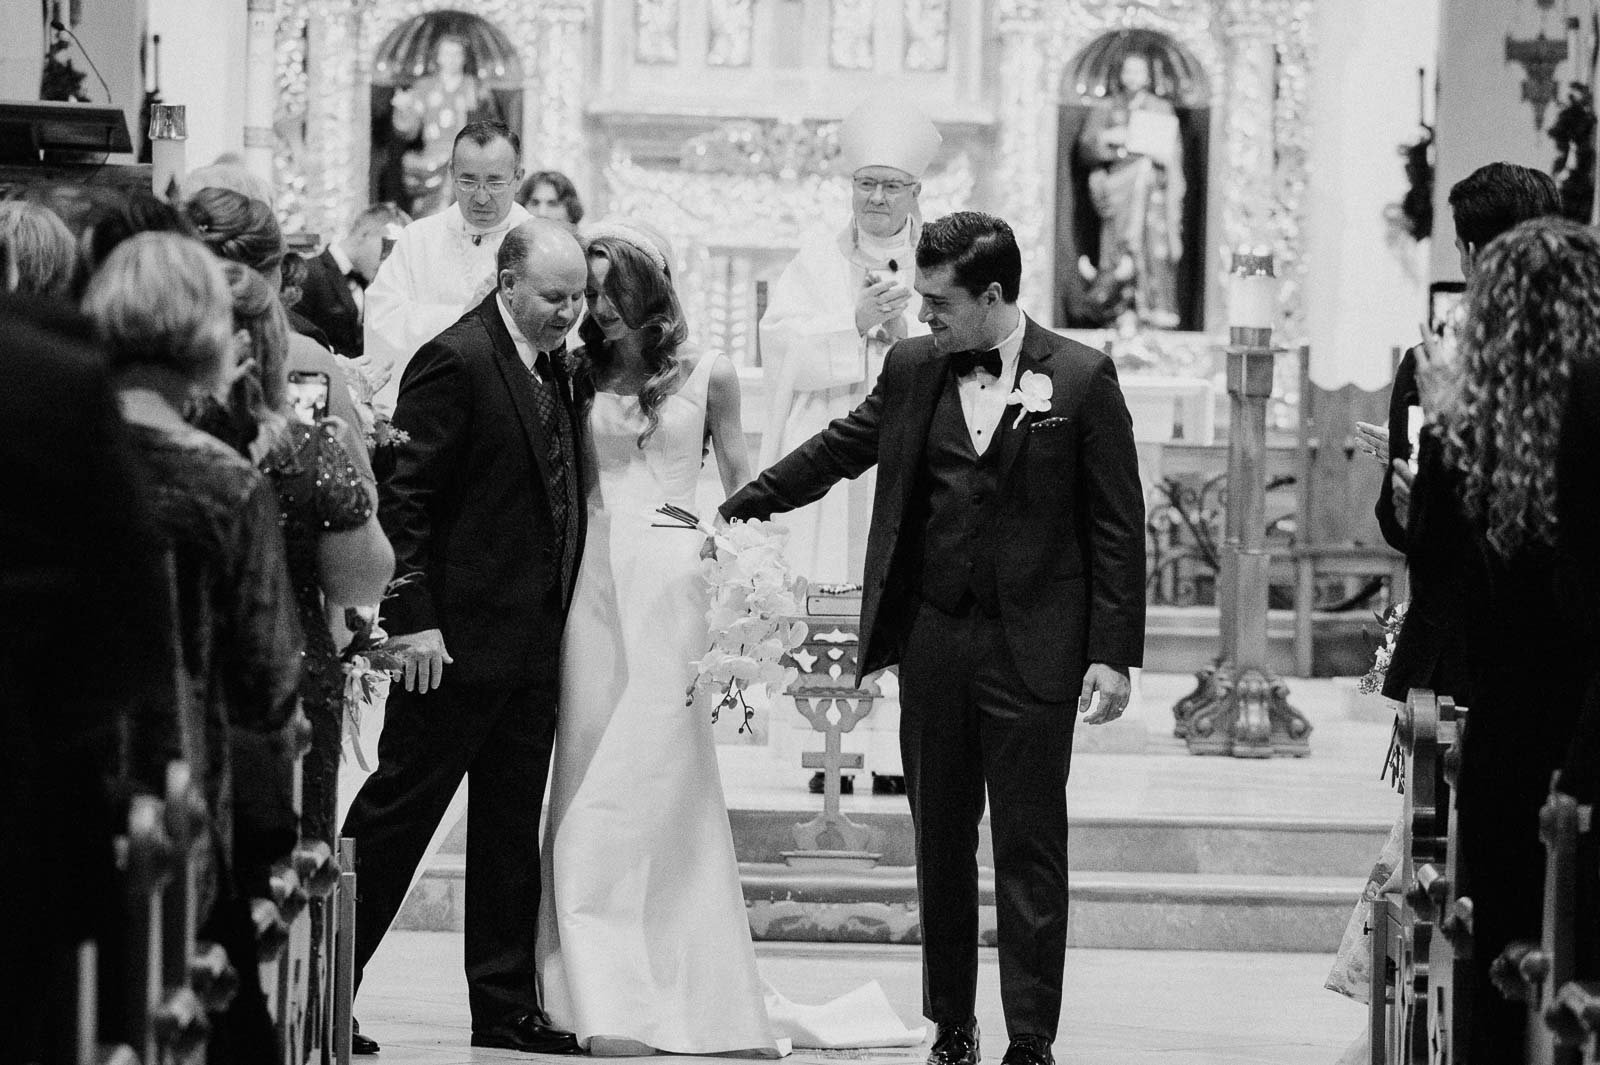 The bride hugs her father and the groom leads the way down the aisle at a catholic wedding ceremony in San Antonio